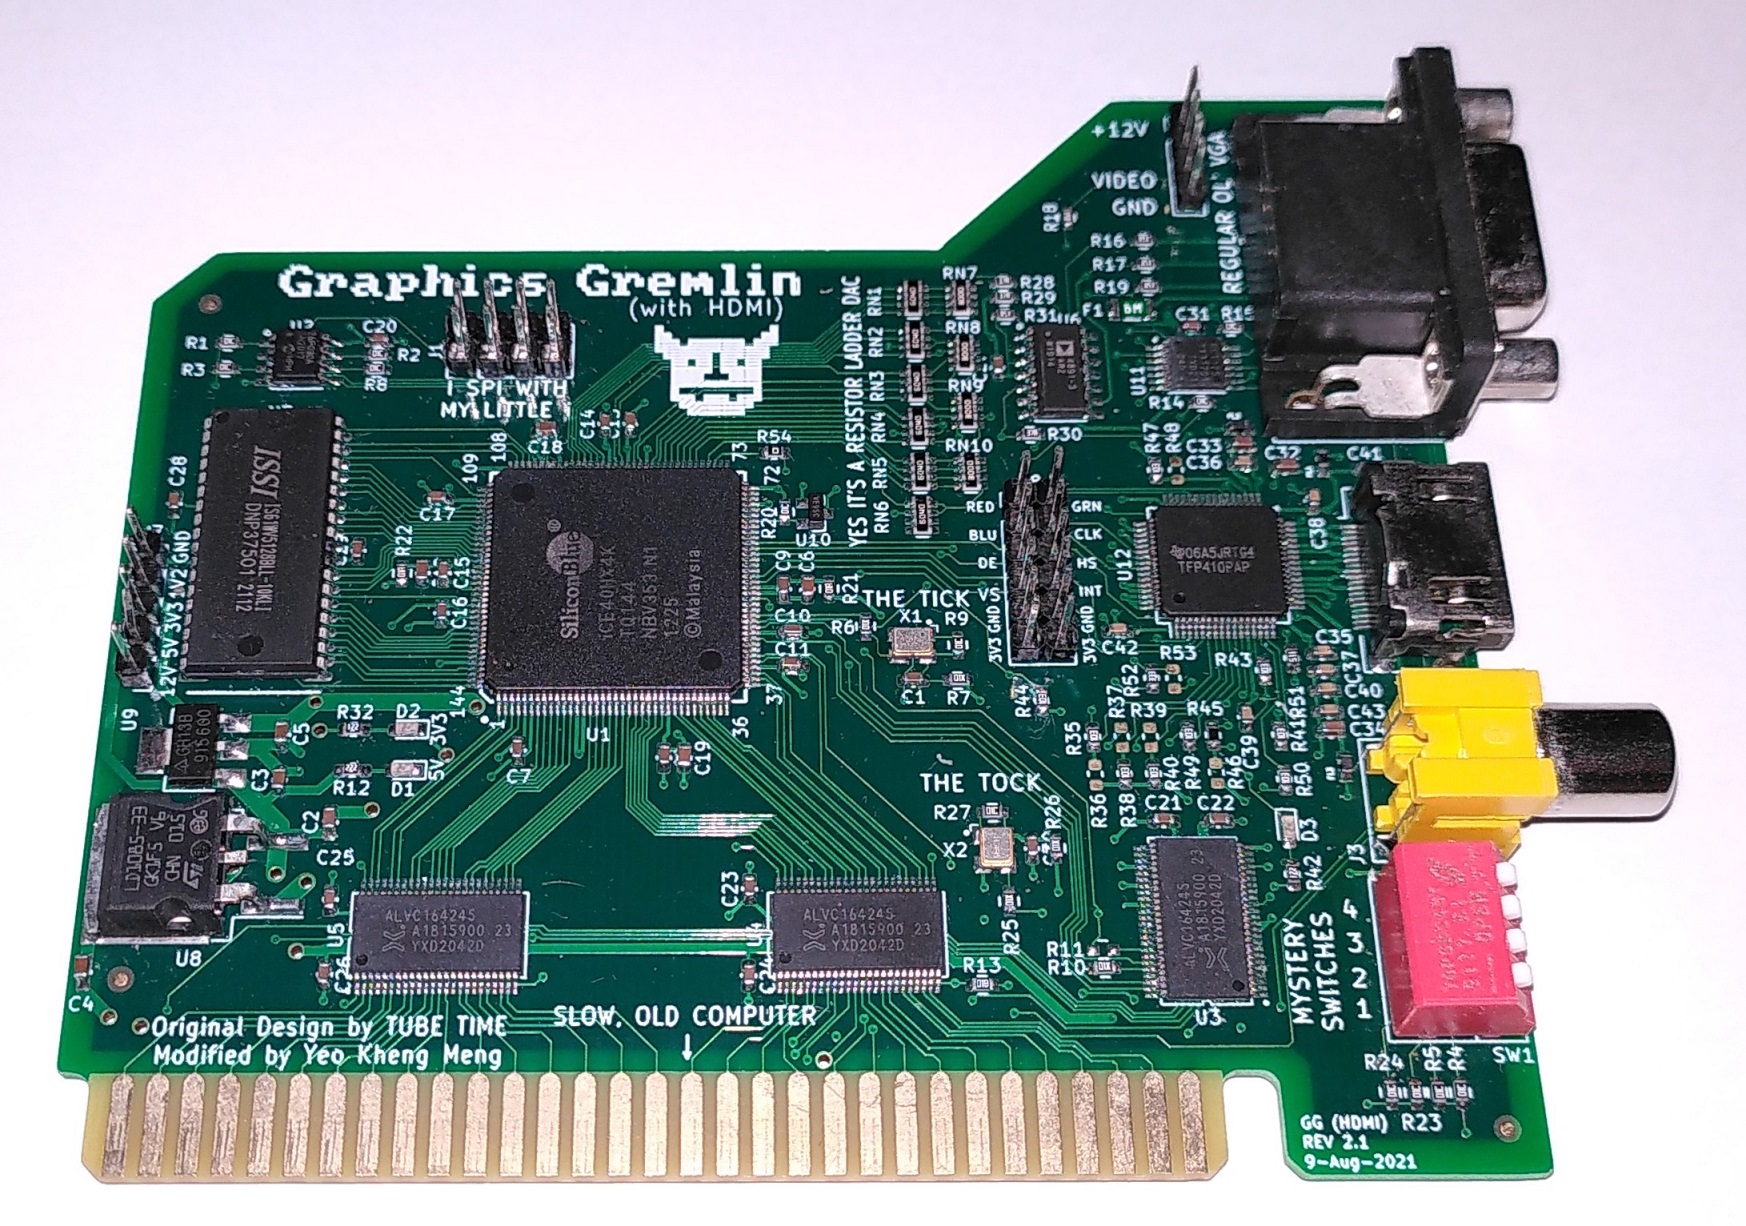 Upgraded Graphics Gremlin Adds HDMI Video To Vintage PCs